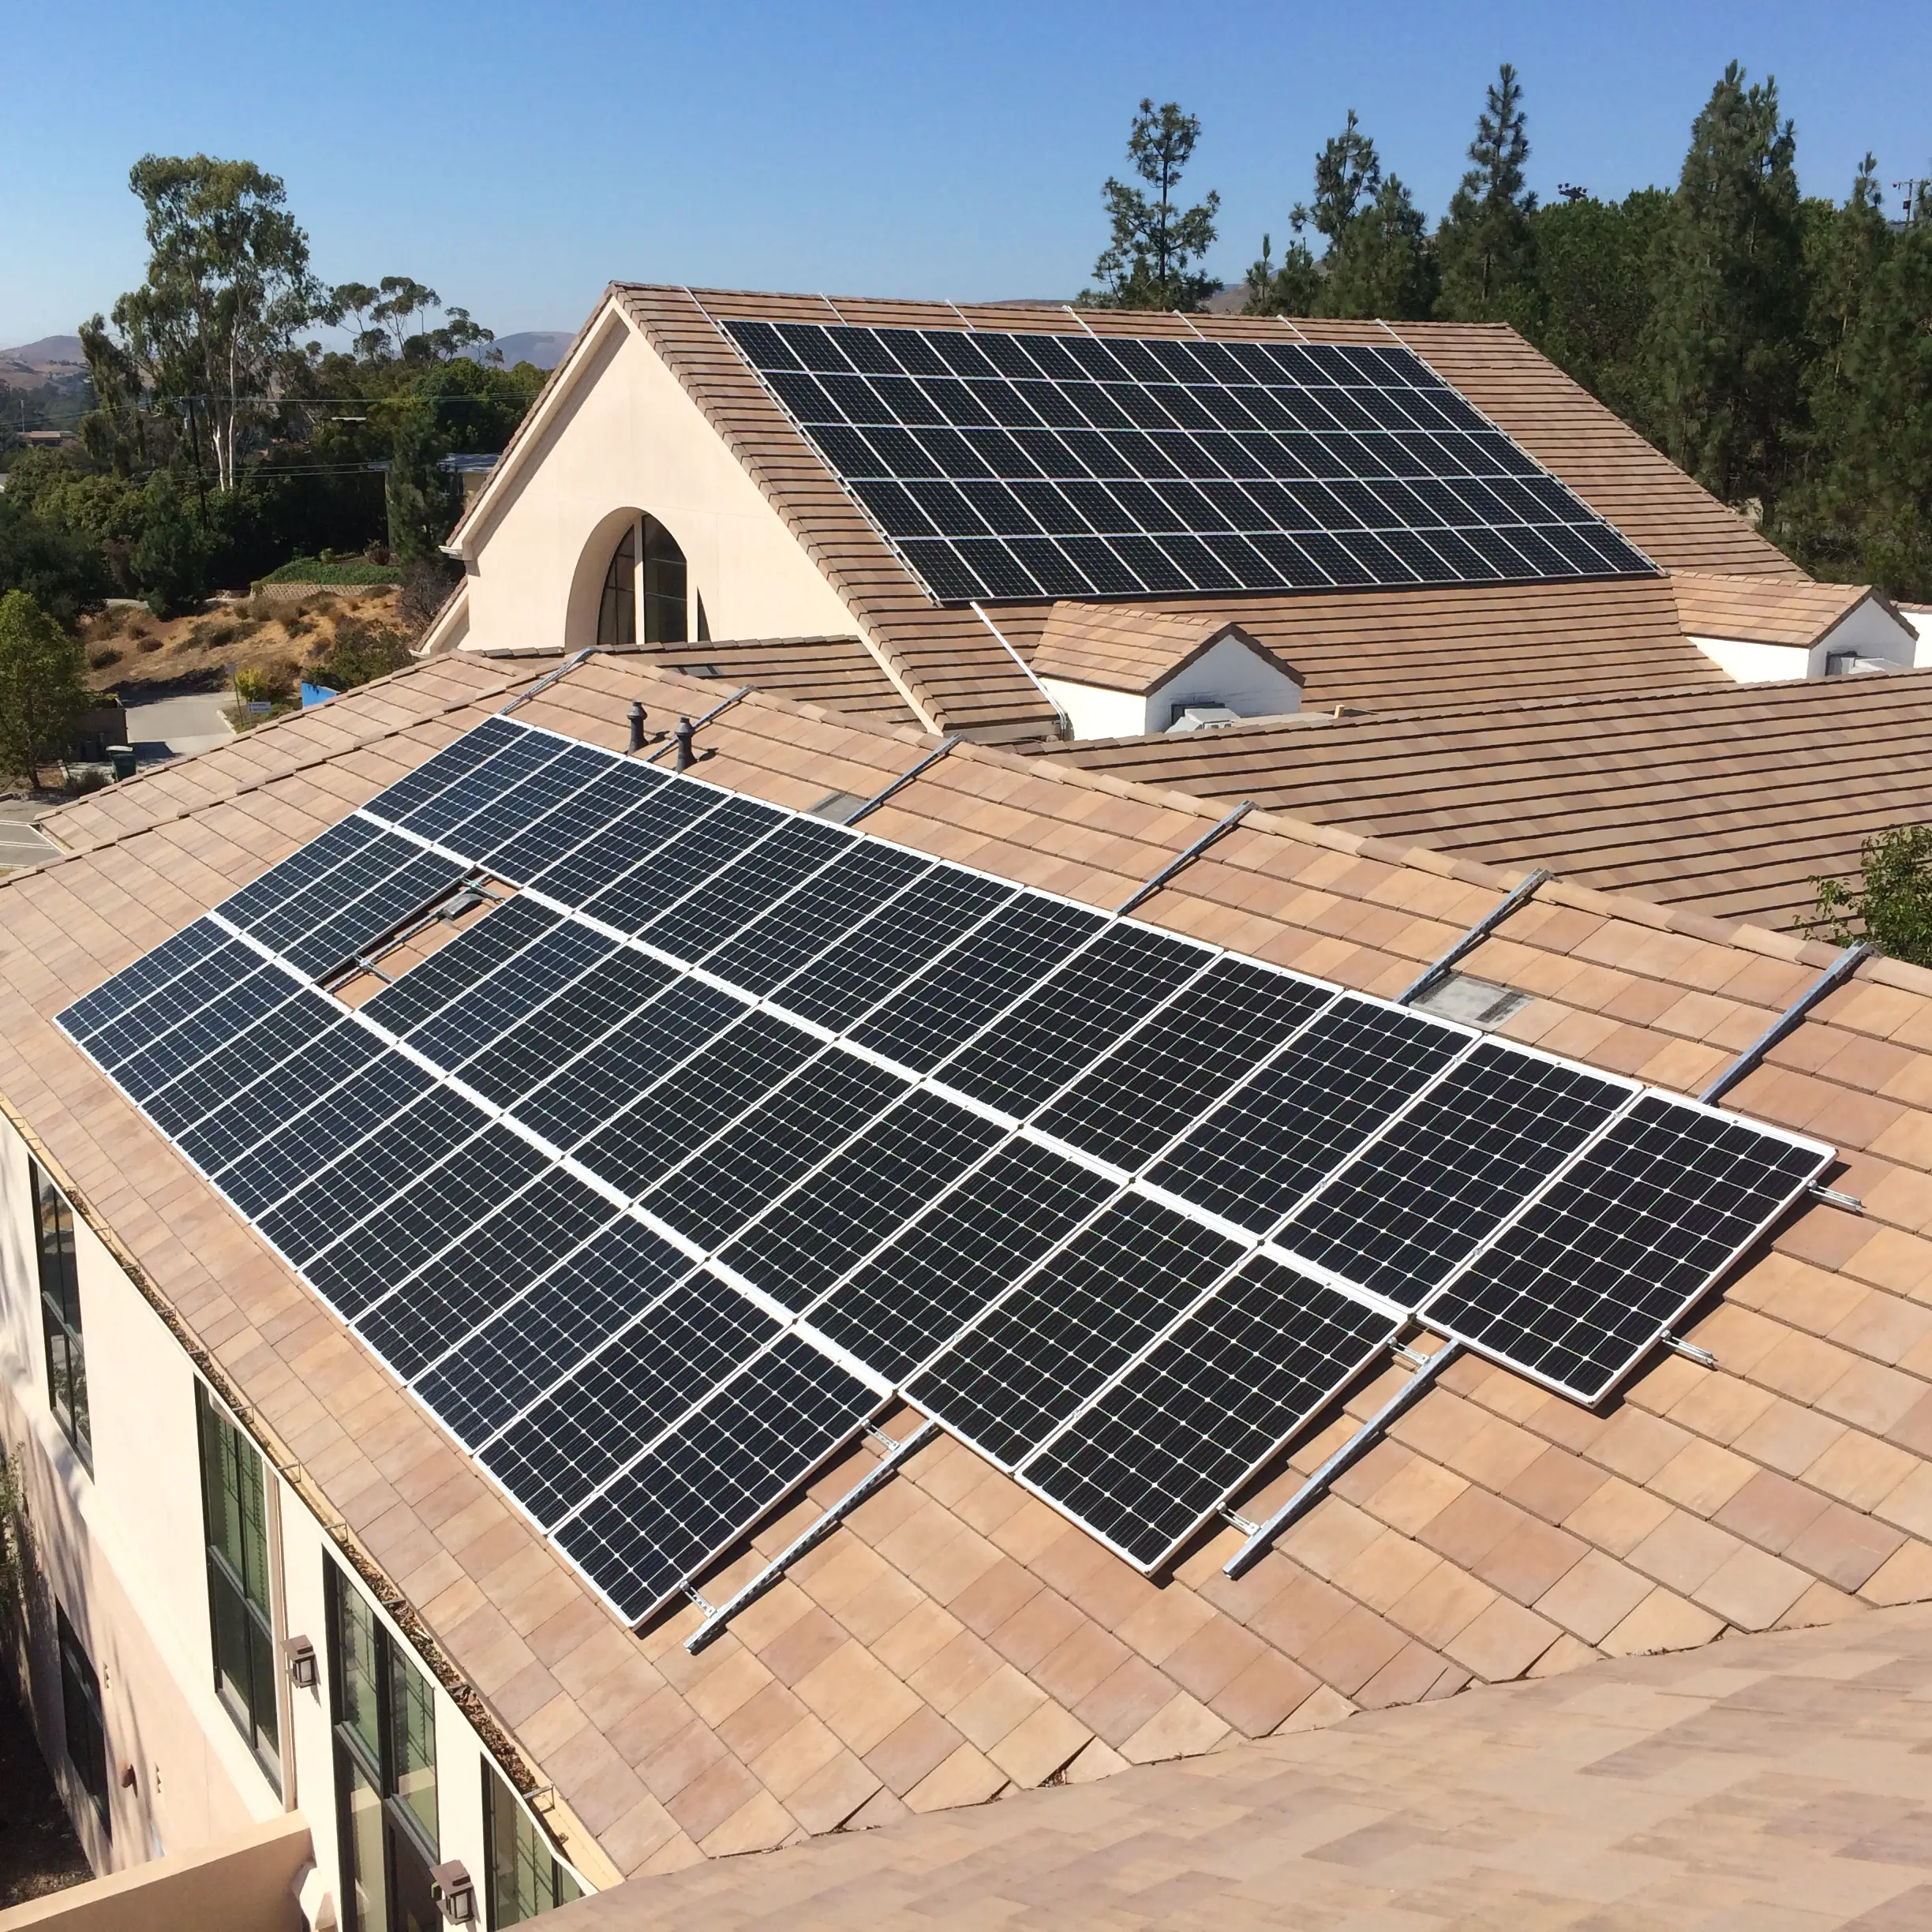 Is it possible to install solar on a sloped roof without drilling holes?